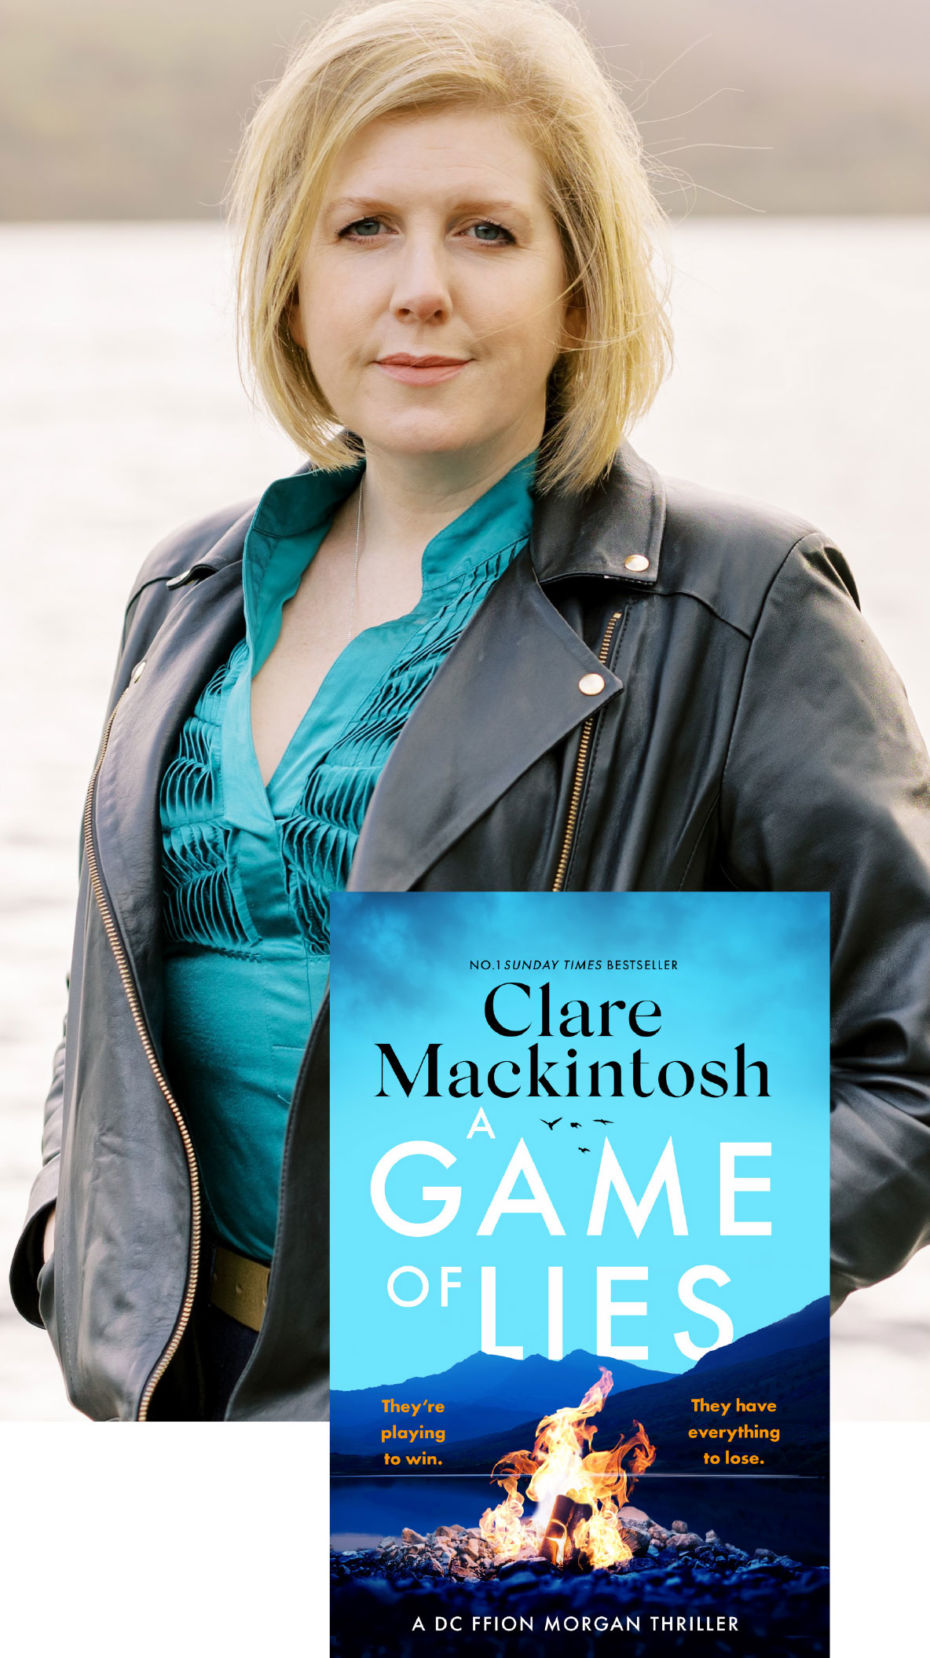 Clare Mackintosh with the front jacket of her noel Game of Lies